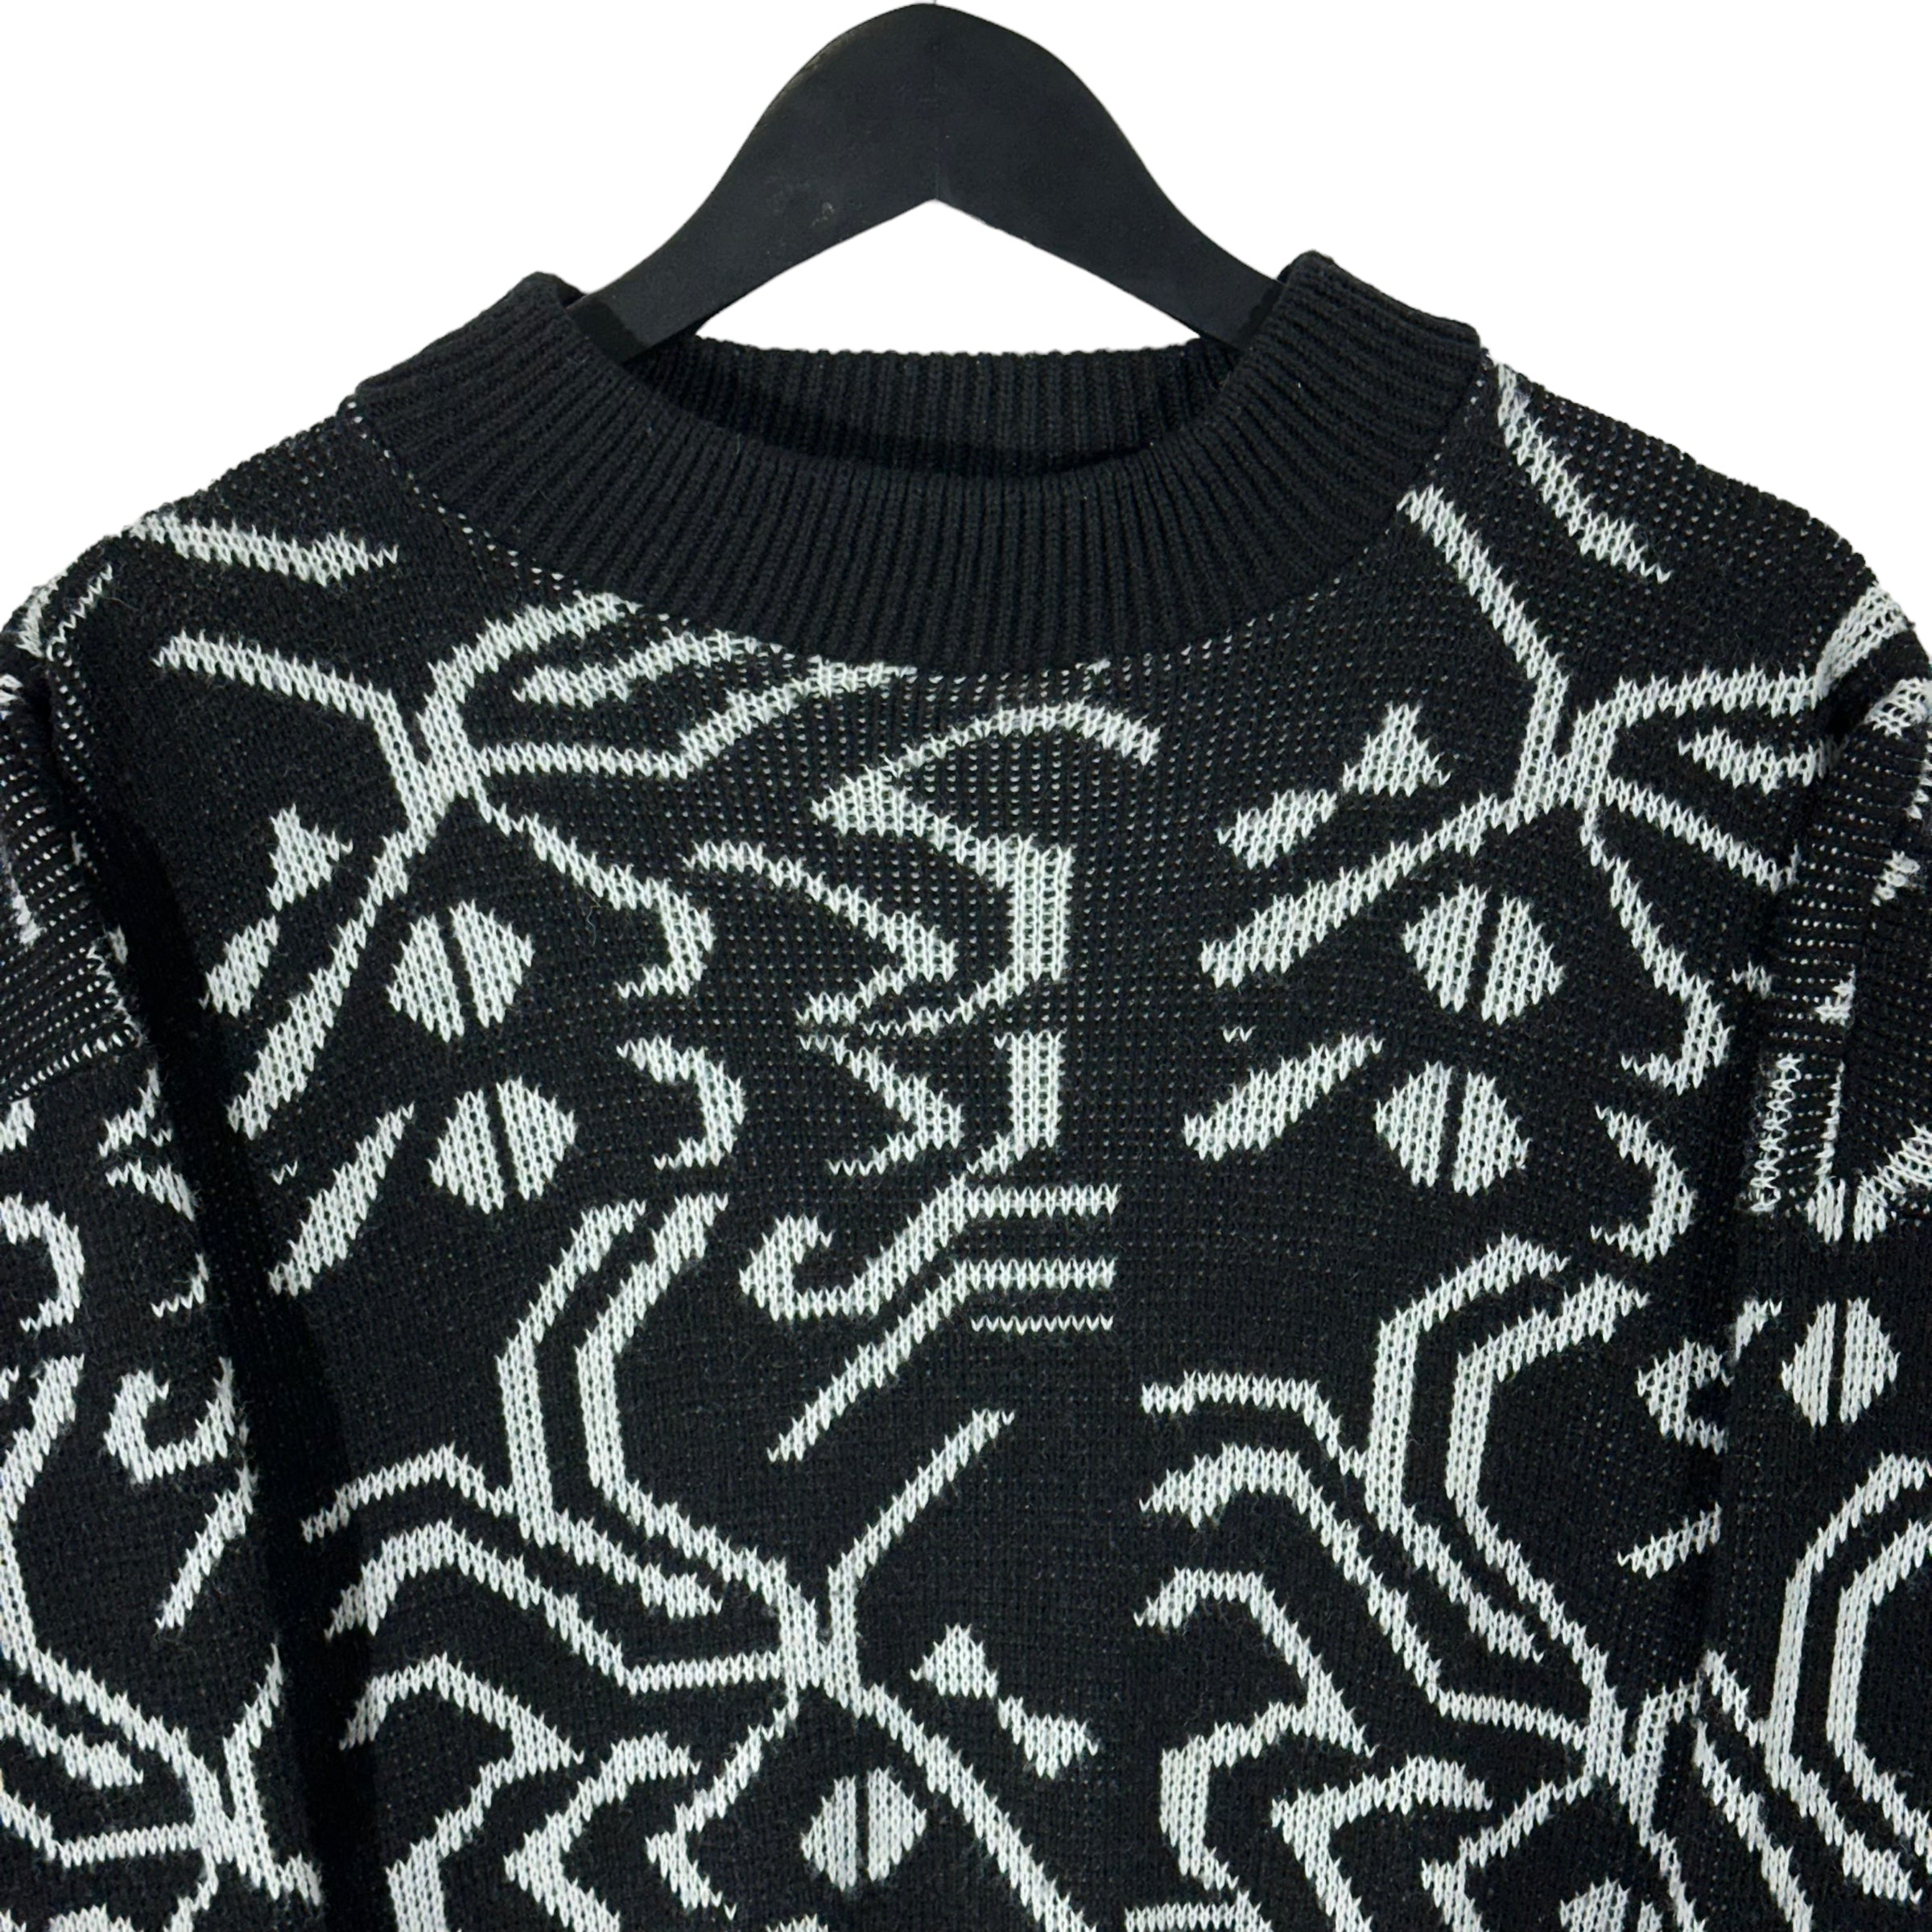 Vintage Abstract Patterned Knit Sweater 80s